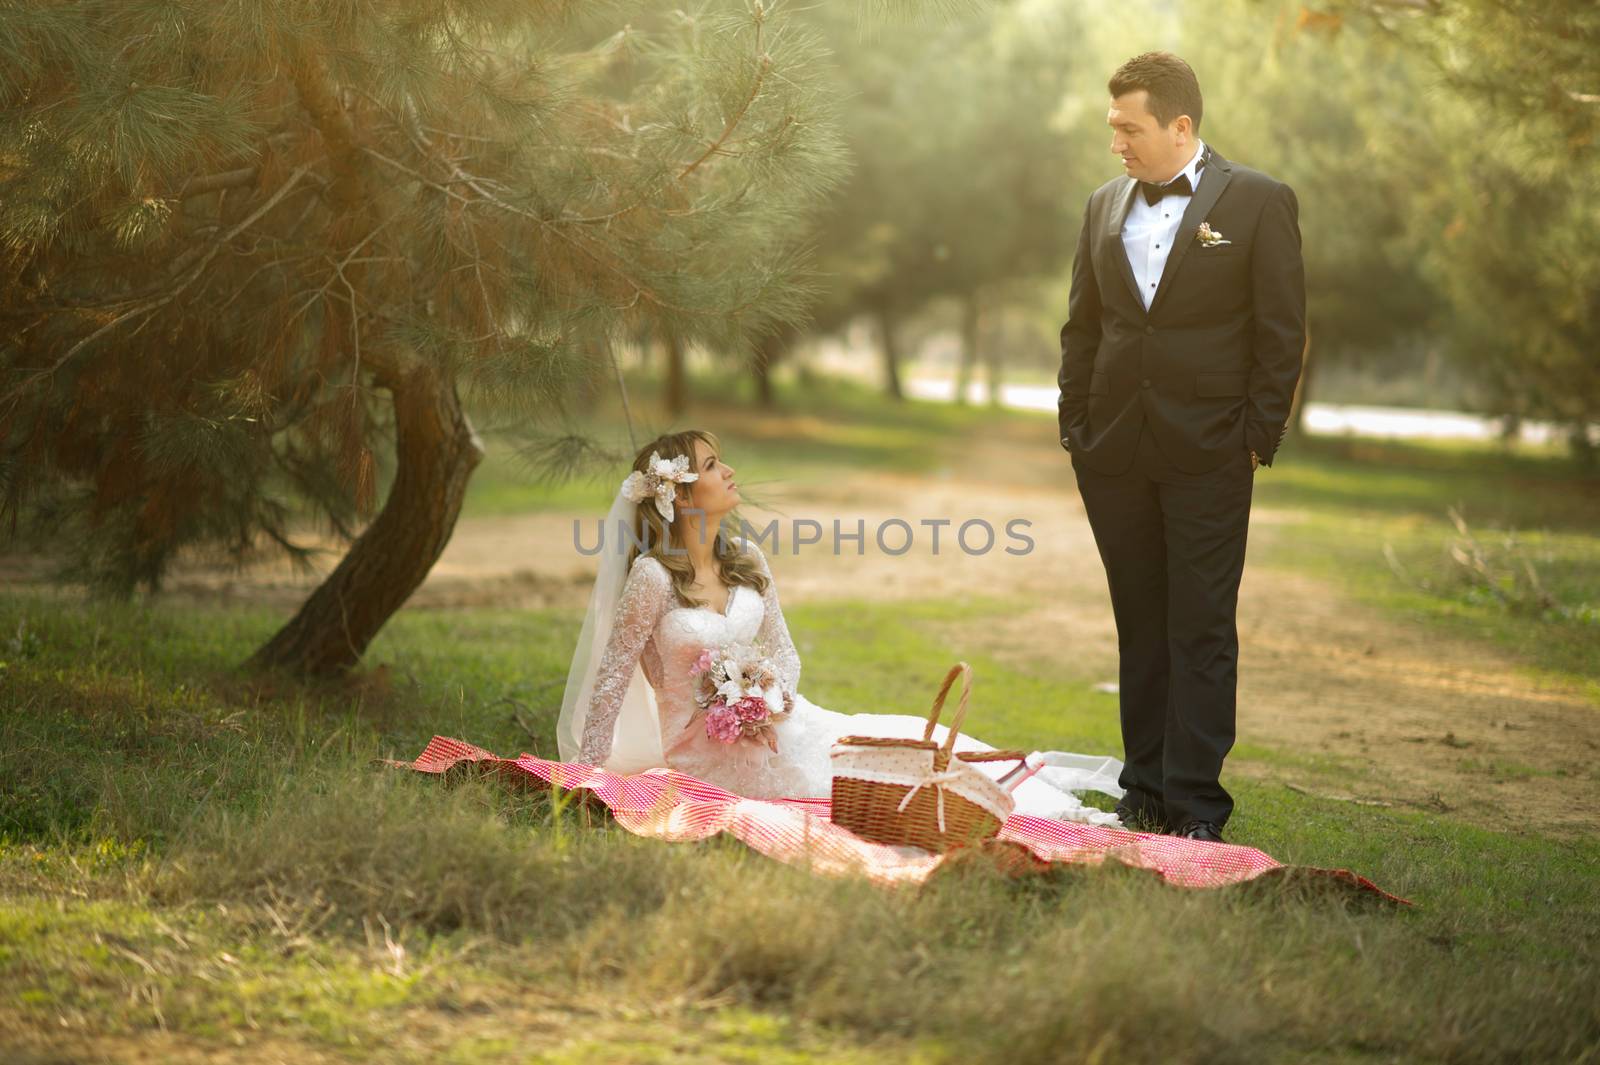 Young bride and groom in wedding dress and suit by ozkanzozmen